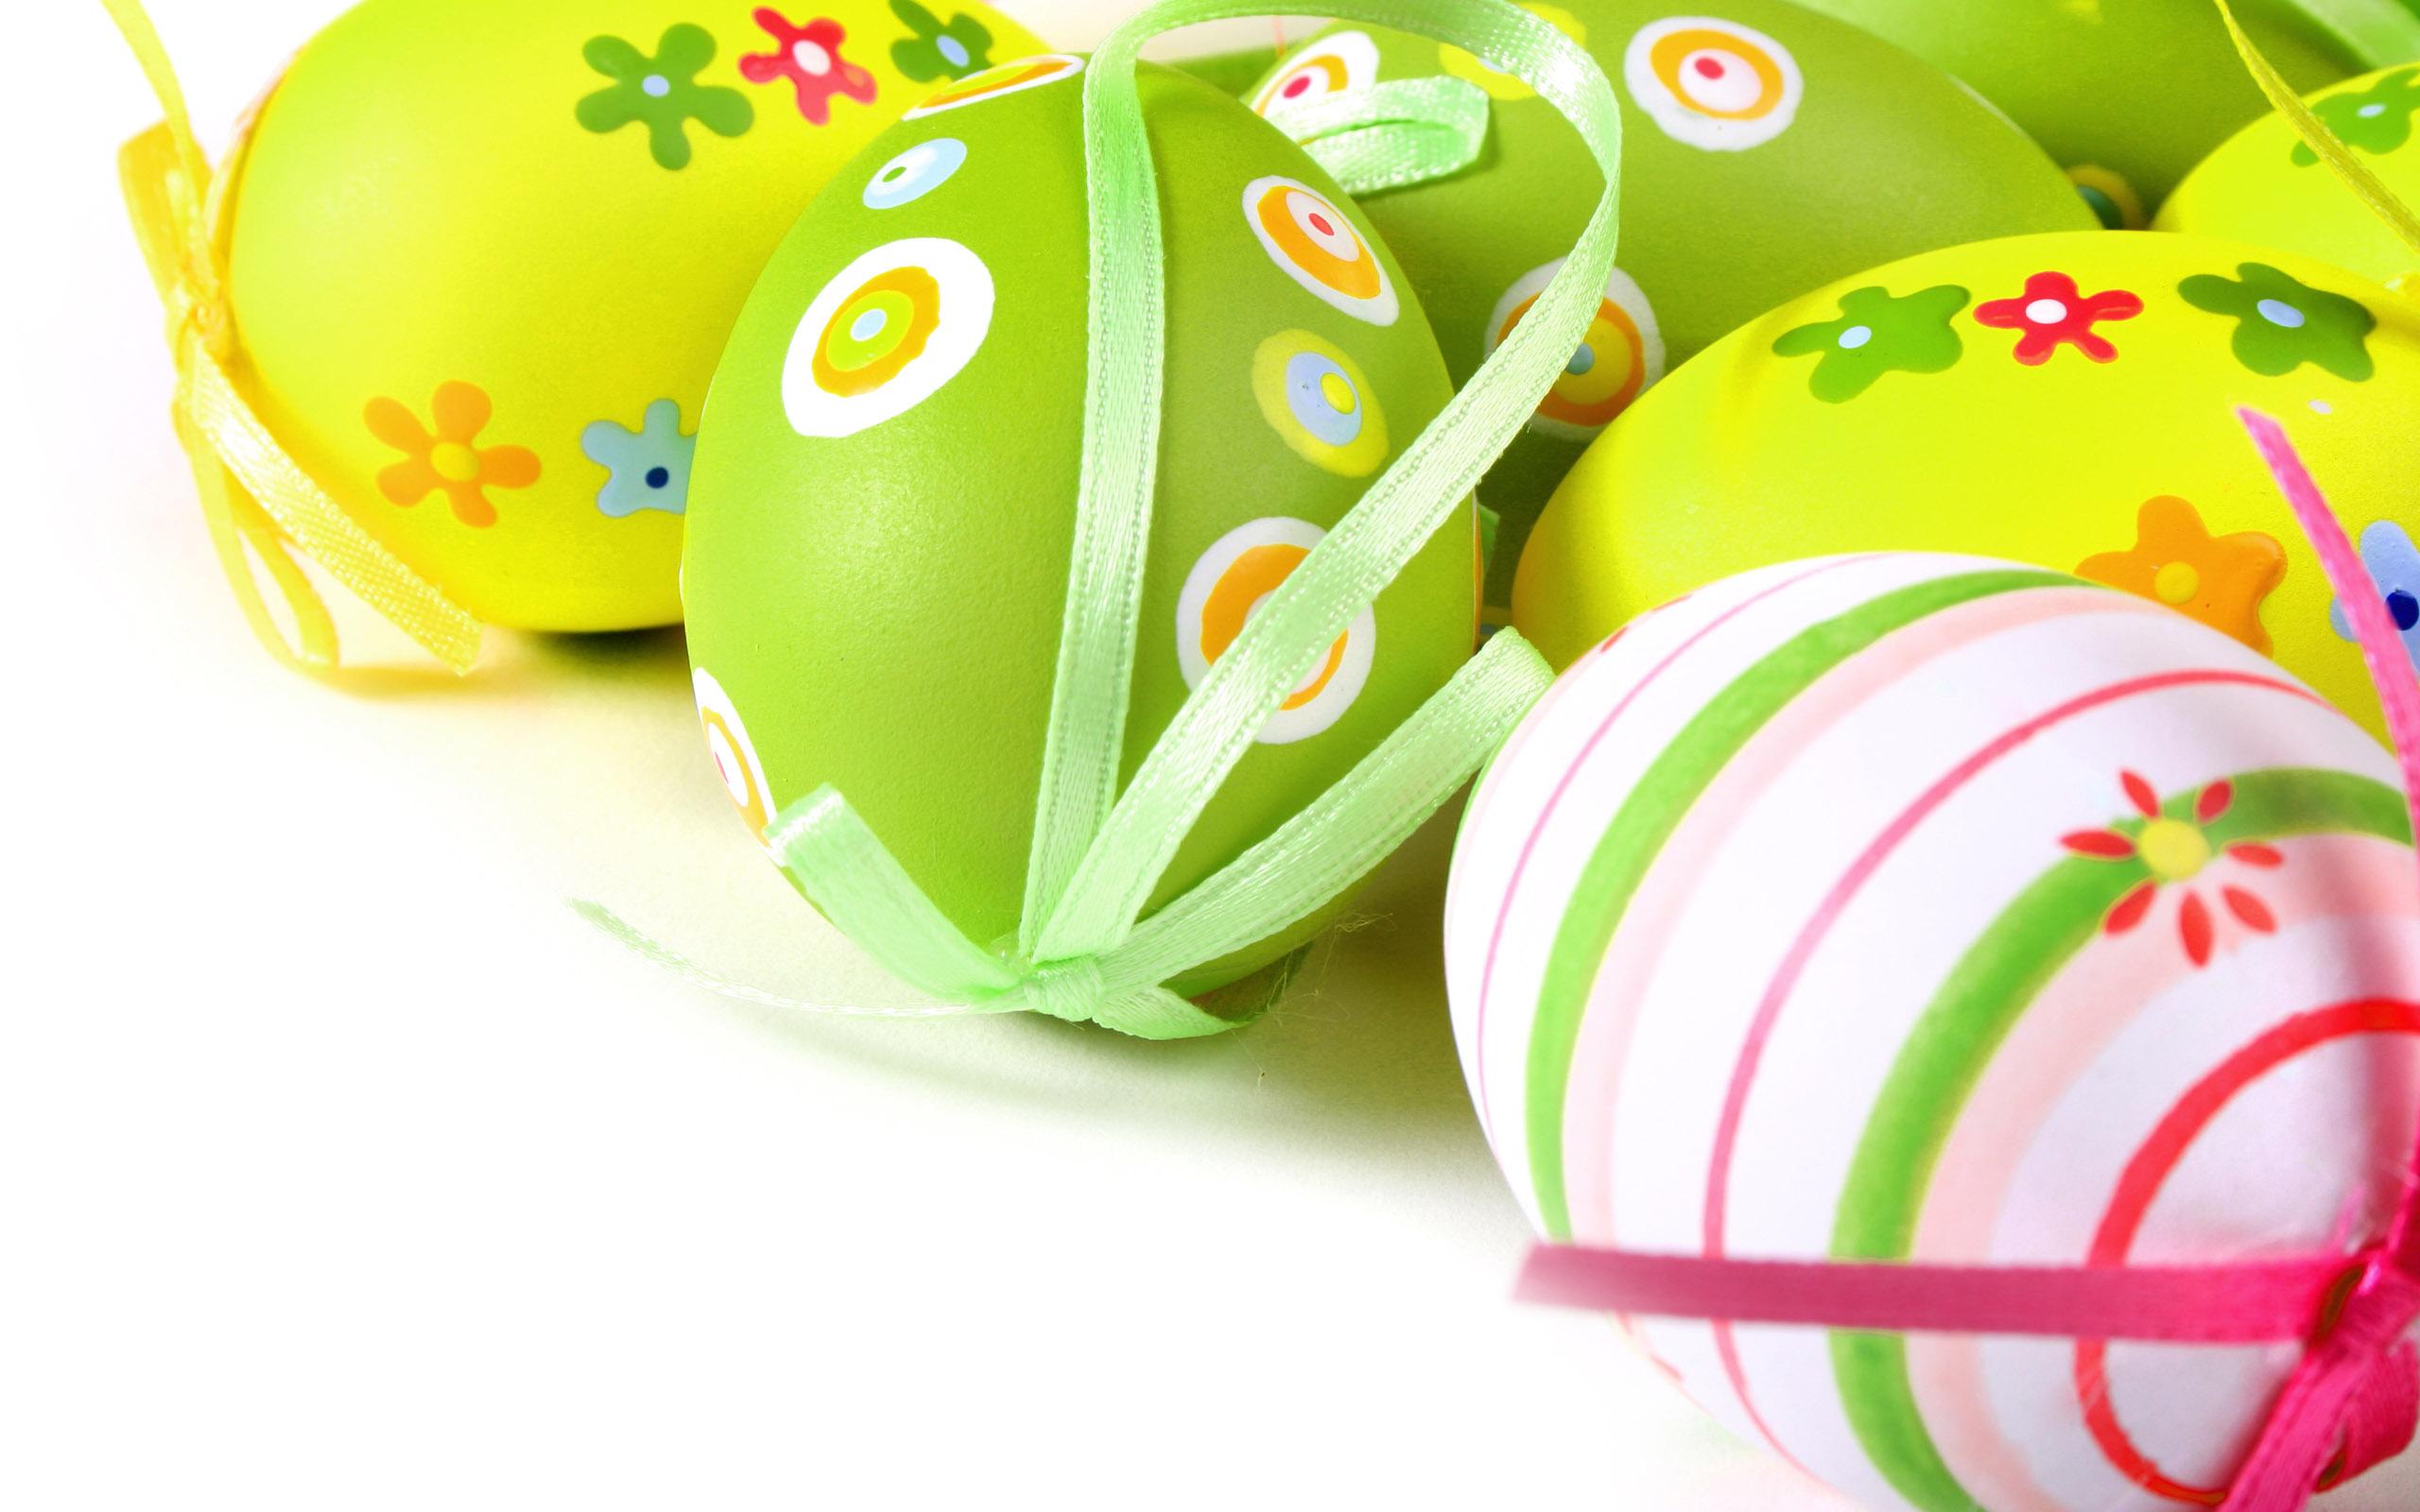 Holiday Easter Wallpaper